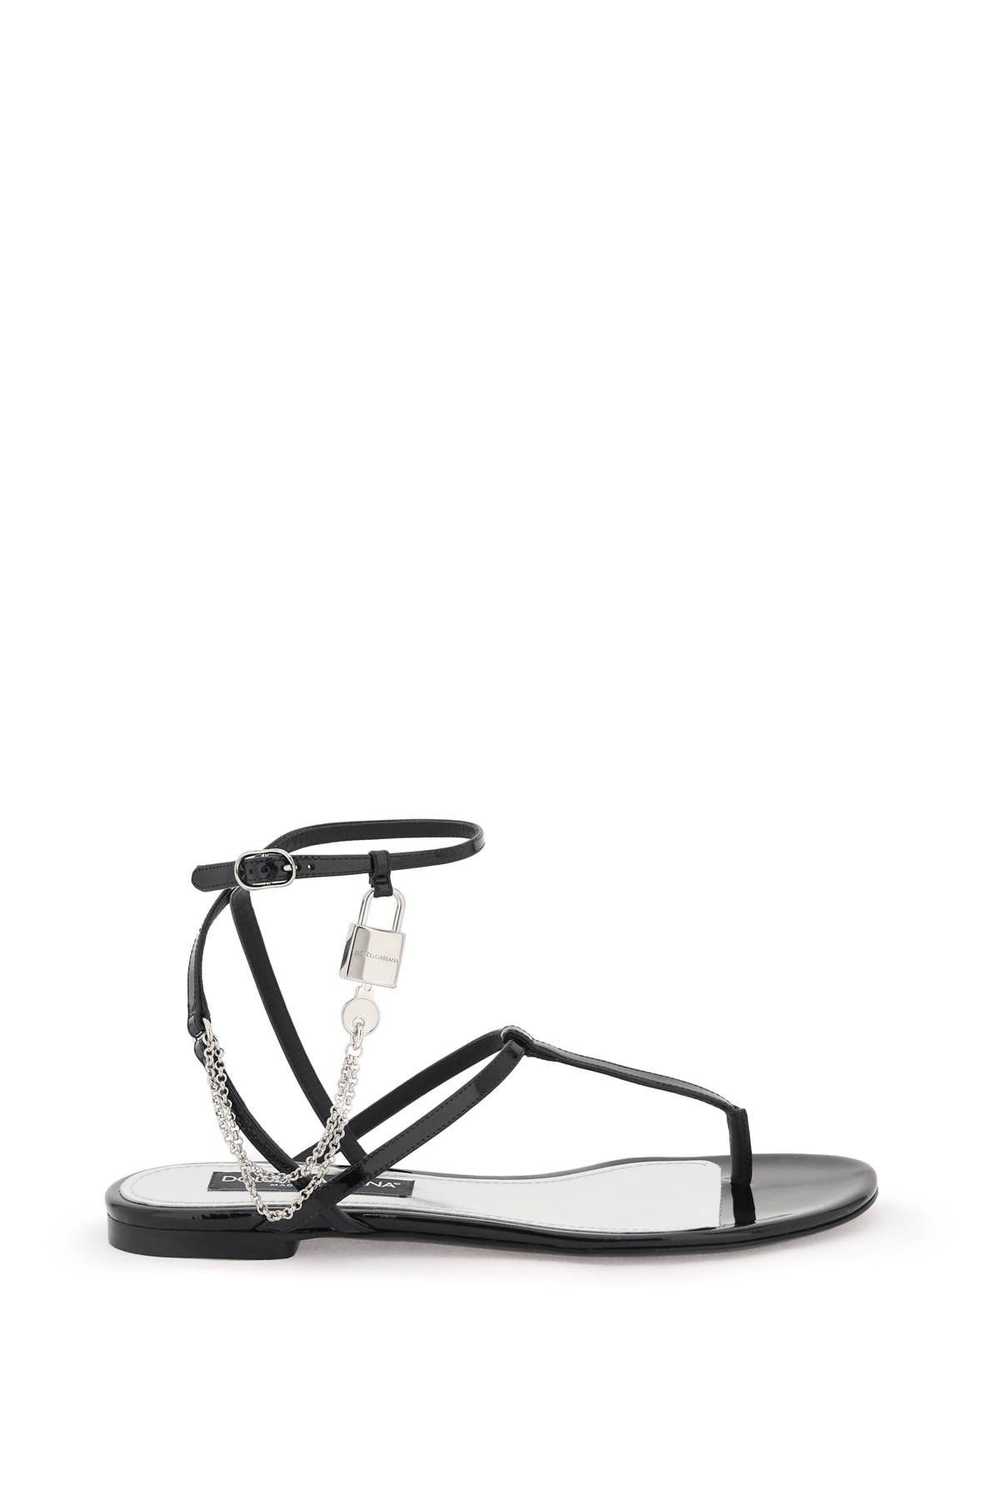 Dolce & Gabbana Patent Leather Thong Sandals With… - image 1